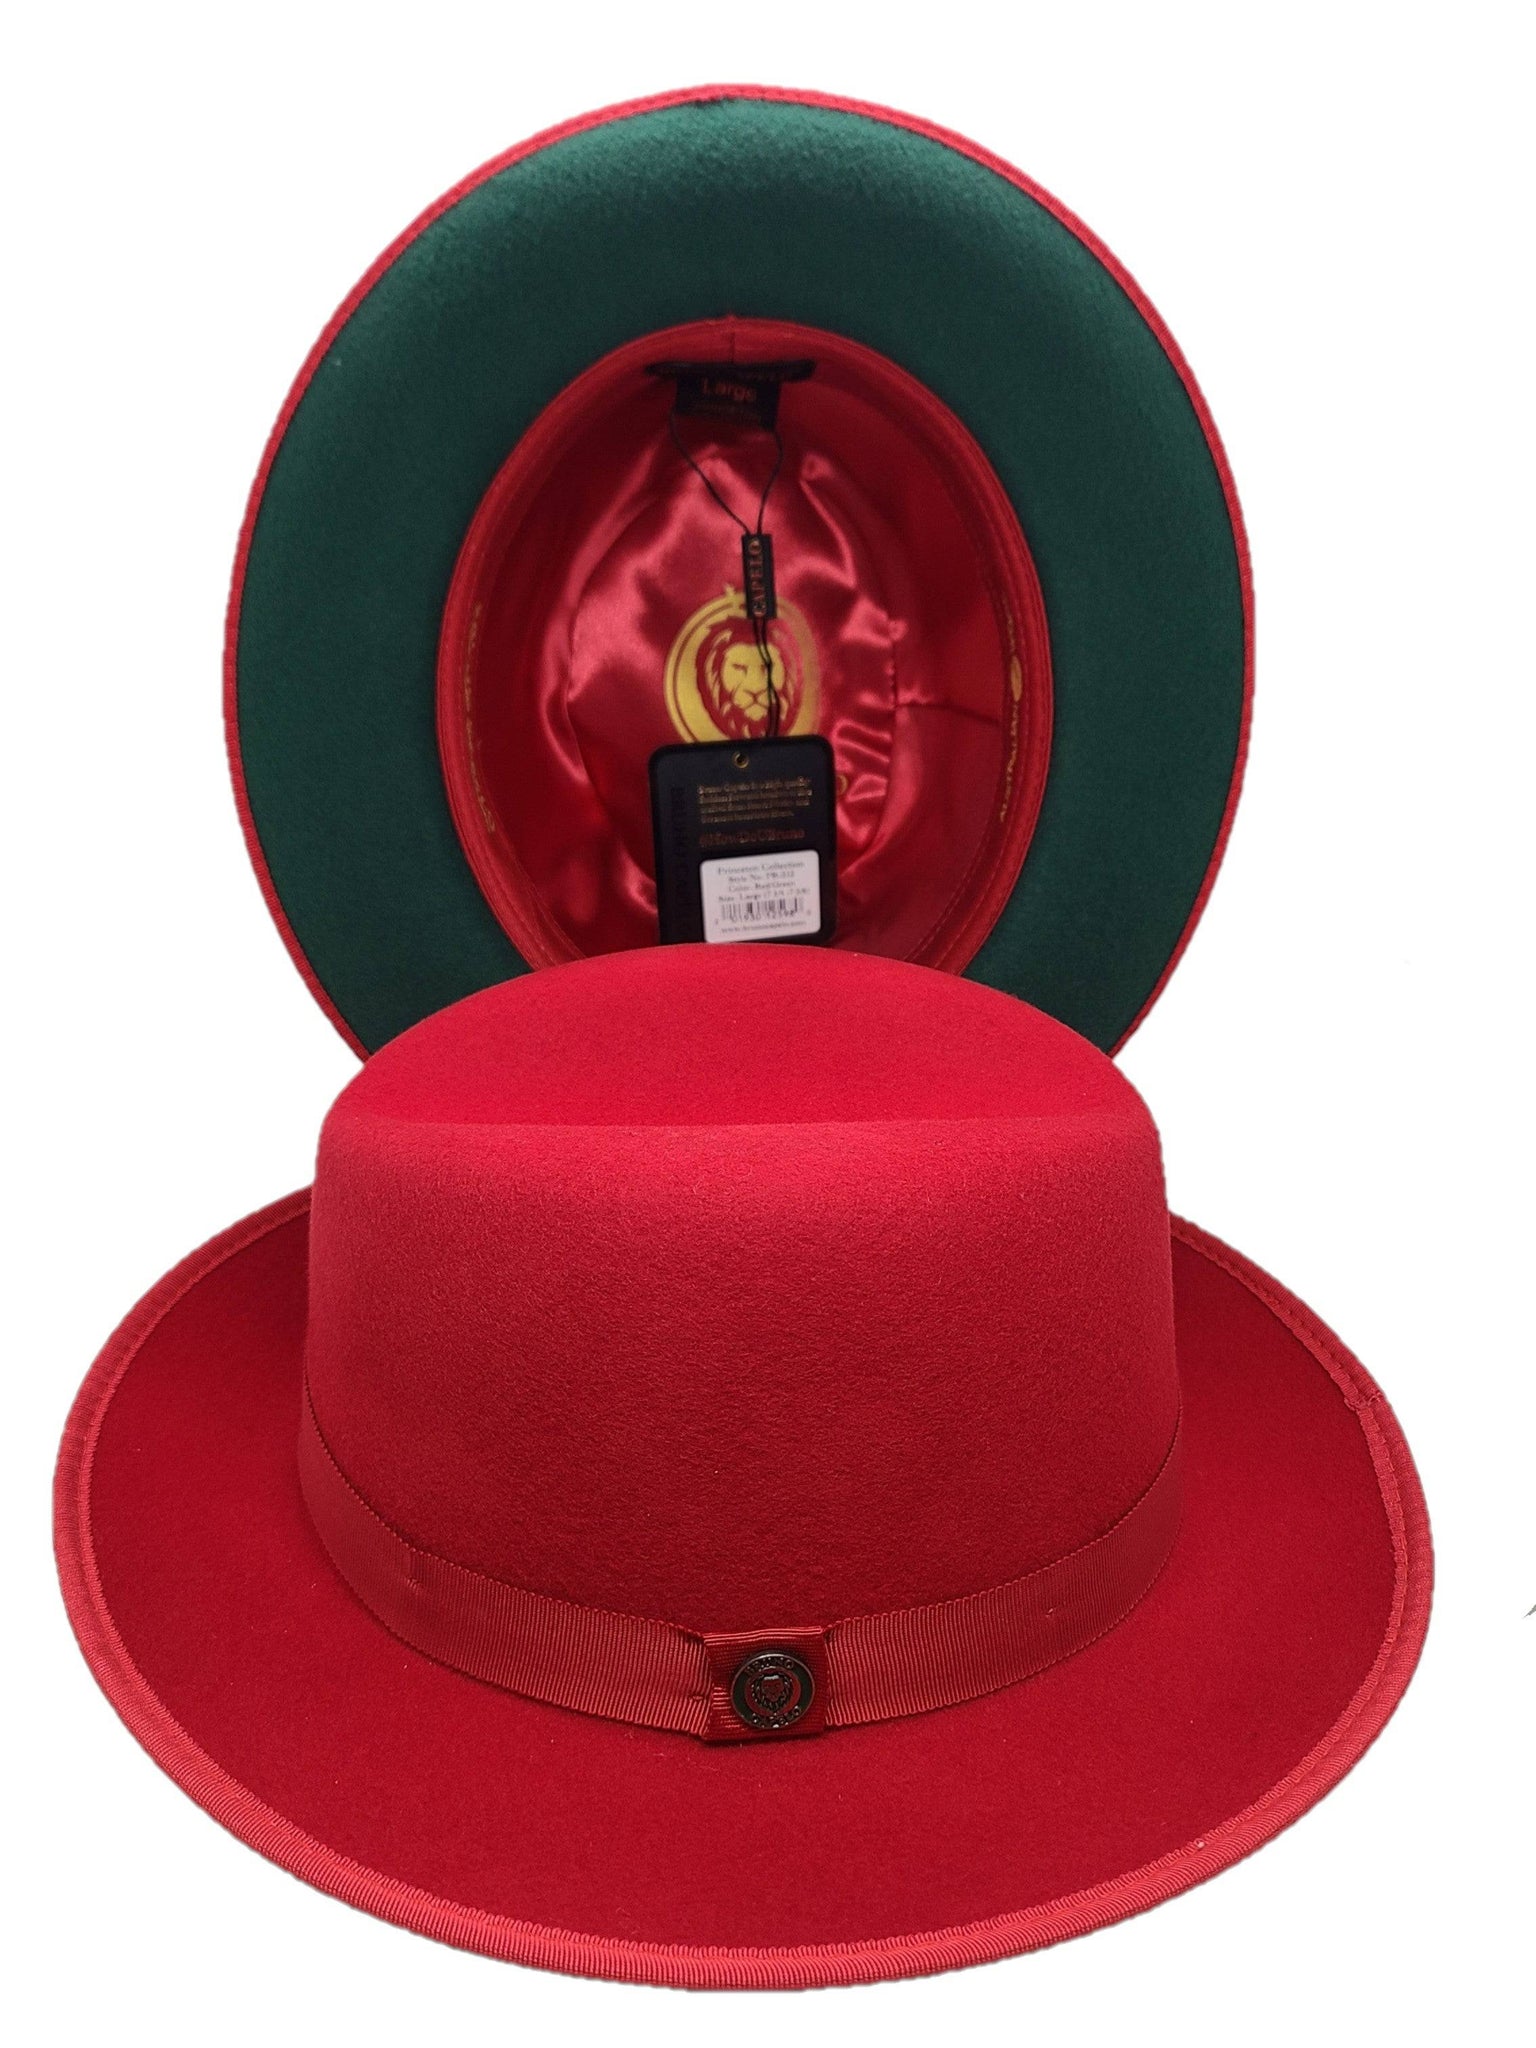 Men's and Women's Wool Fedora Hat - Stylish and warm accessory with a timeless red and green color scheme.